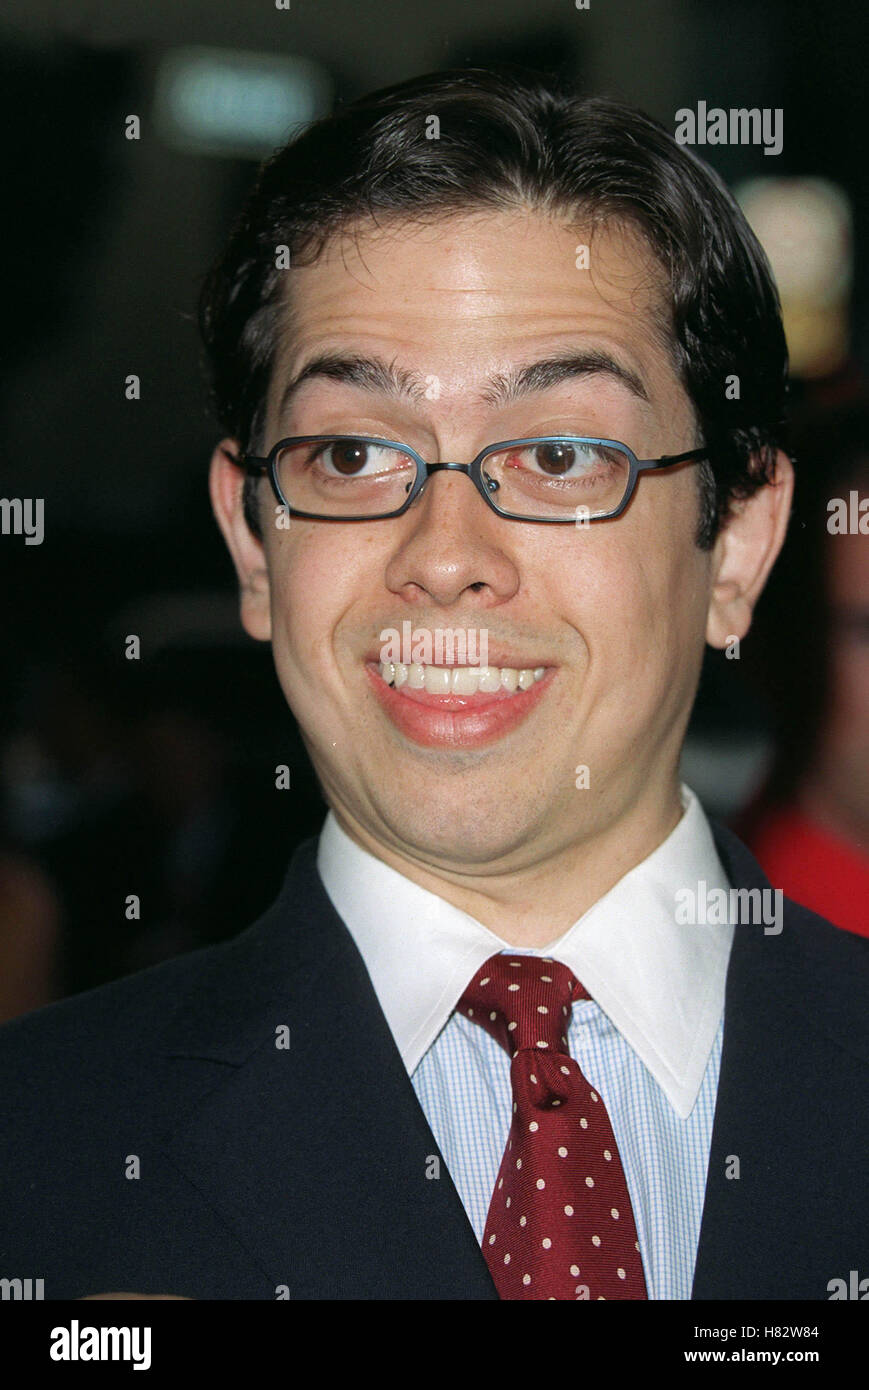 GEOFFERY AREND 'BUBBLE BOY' FILM PREMIERE HOLLYWOOD LOS ANGELES USA 23 August 2001 Stock Photo